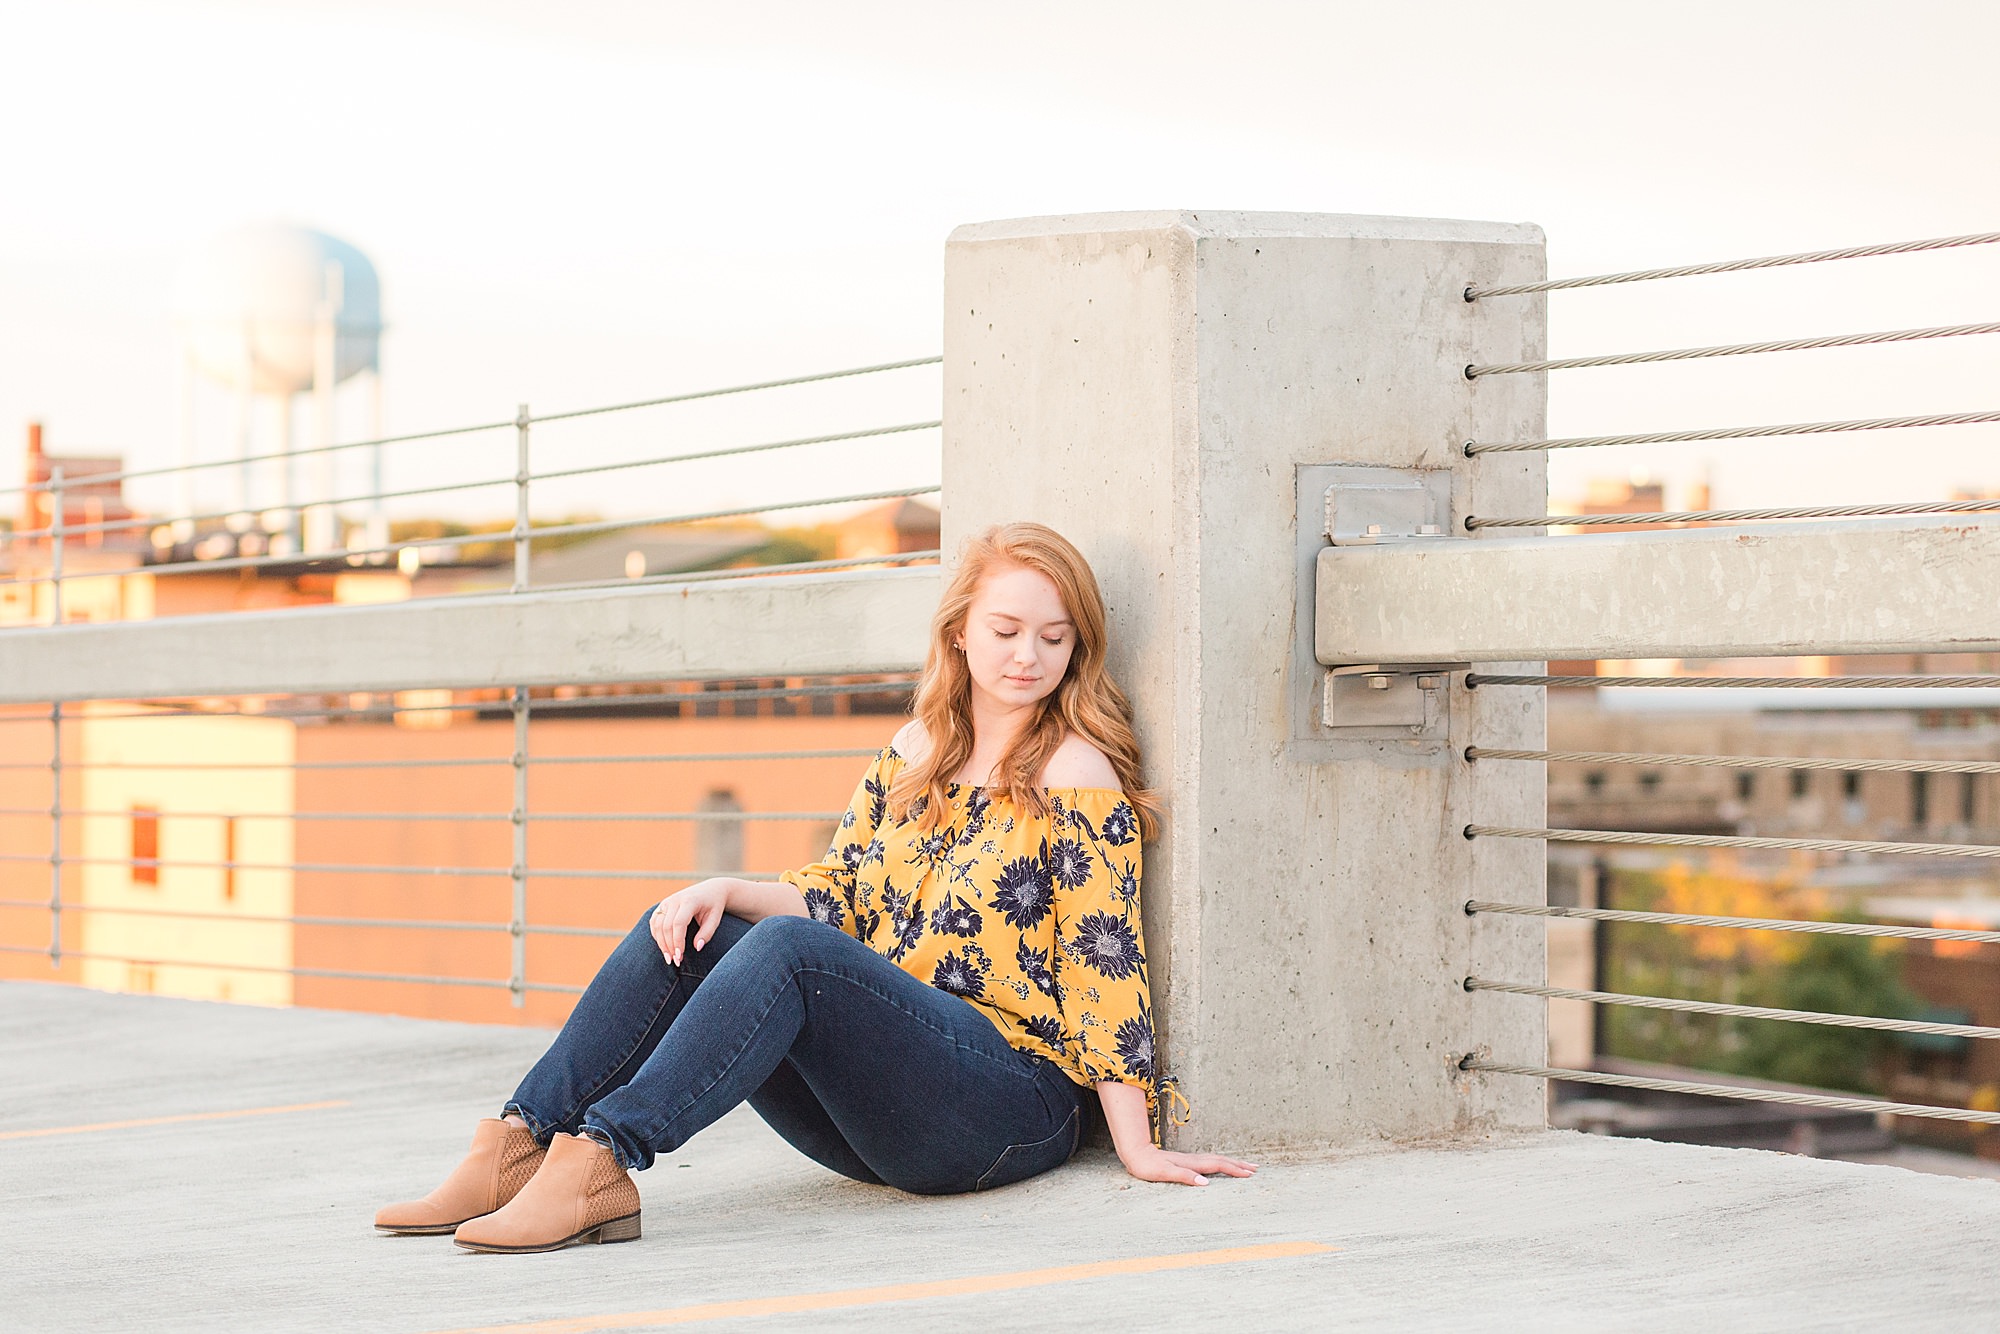 High school senior at the top of a Downtown Fargo parking ramp in blue and yellow floral and jeans